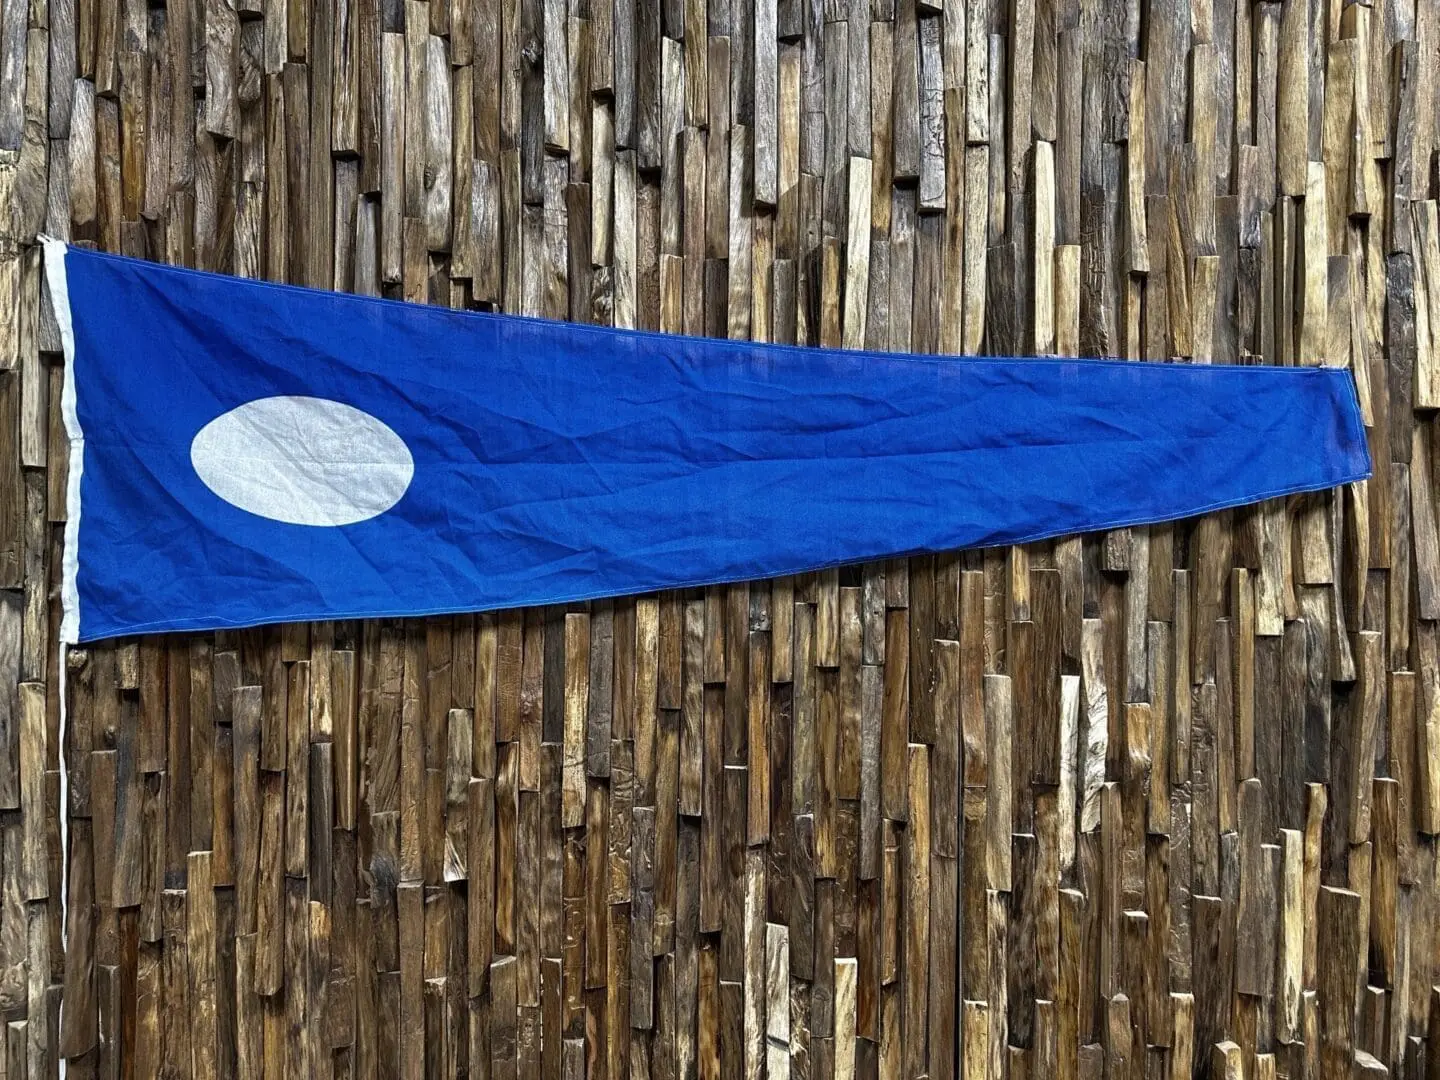 A blue flag hanging on the side of a wooden wall.